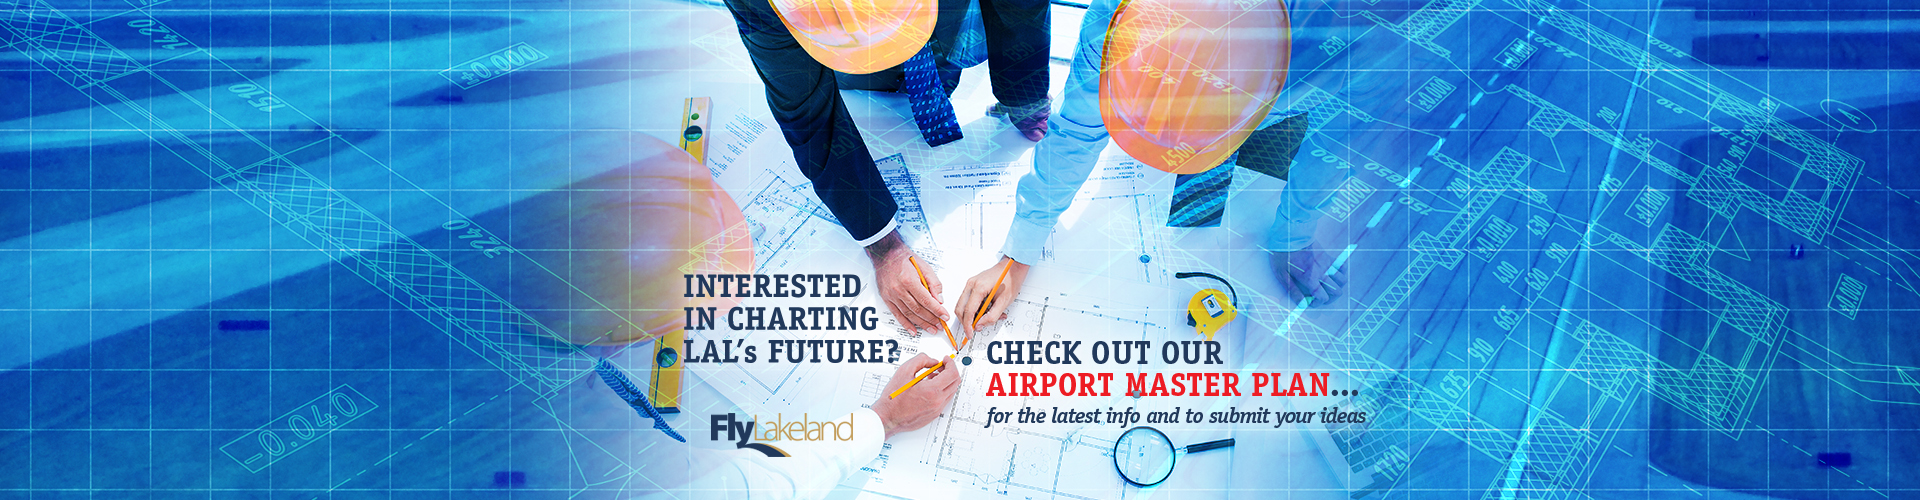 Interested in charting LAL's future - Check out our Airport Master Plan for the latest info and to submit your ideas